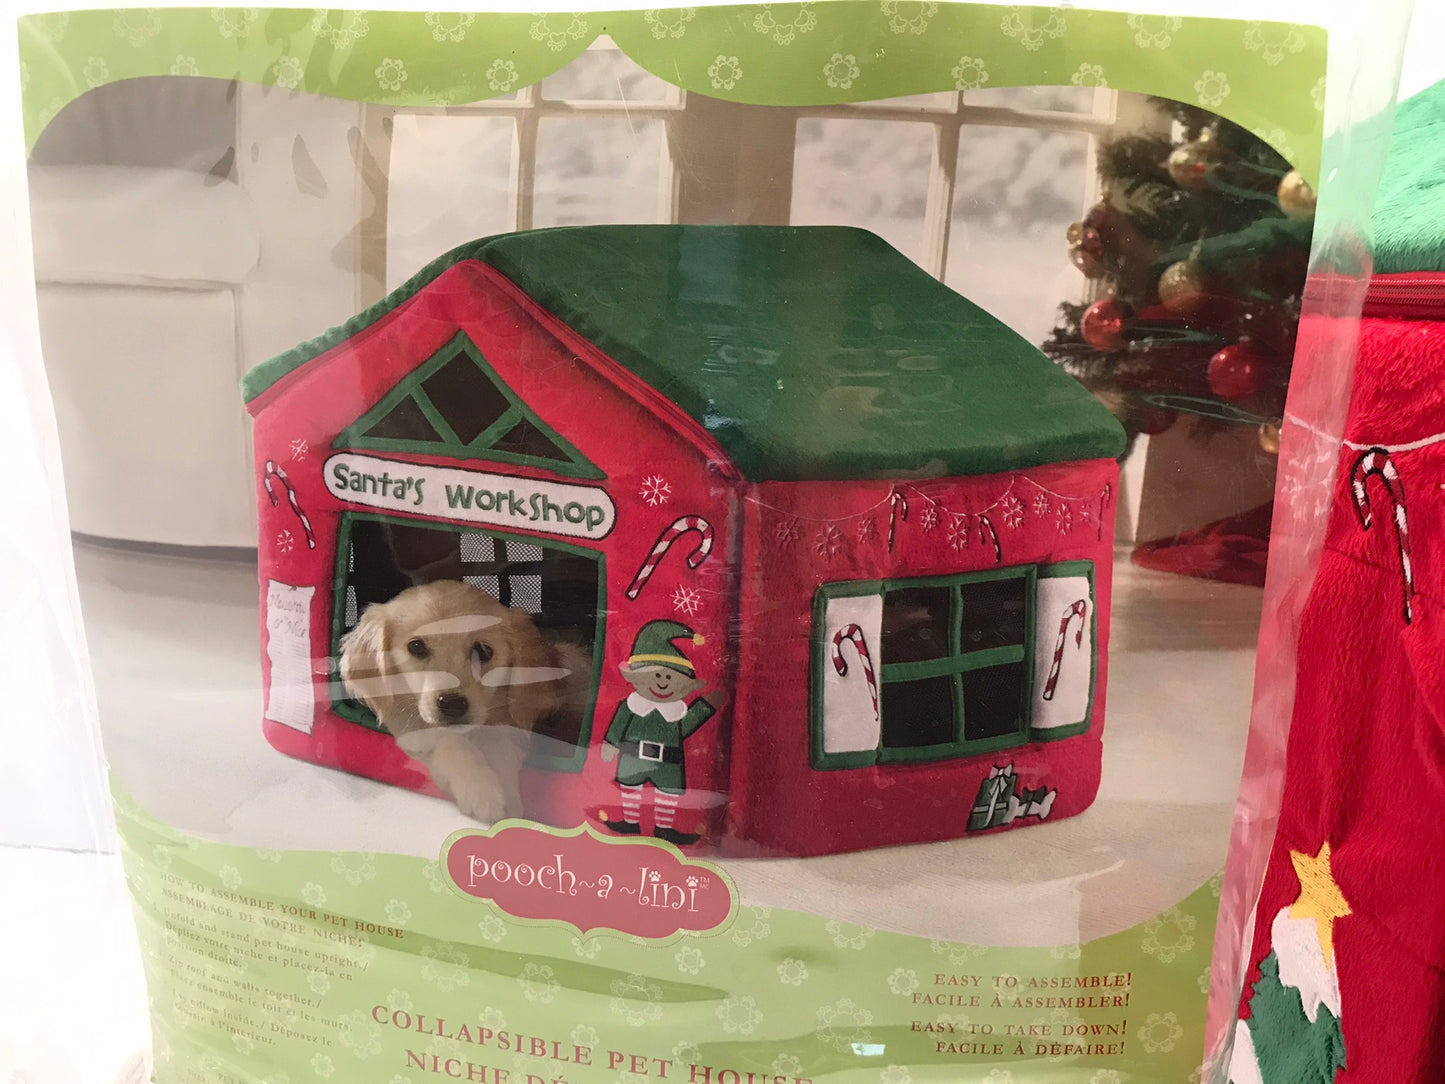 Christmas Pooch A Lini Collapsible Pet House Santa's Workshop 19.6x18.5x18.75 Inches Fits Small Dogs Under 15lbs Puppies Or Cats Used Once Like New